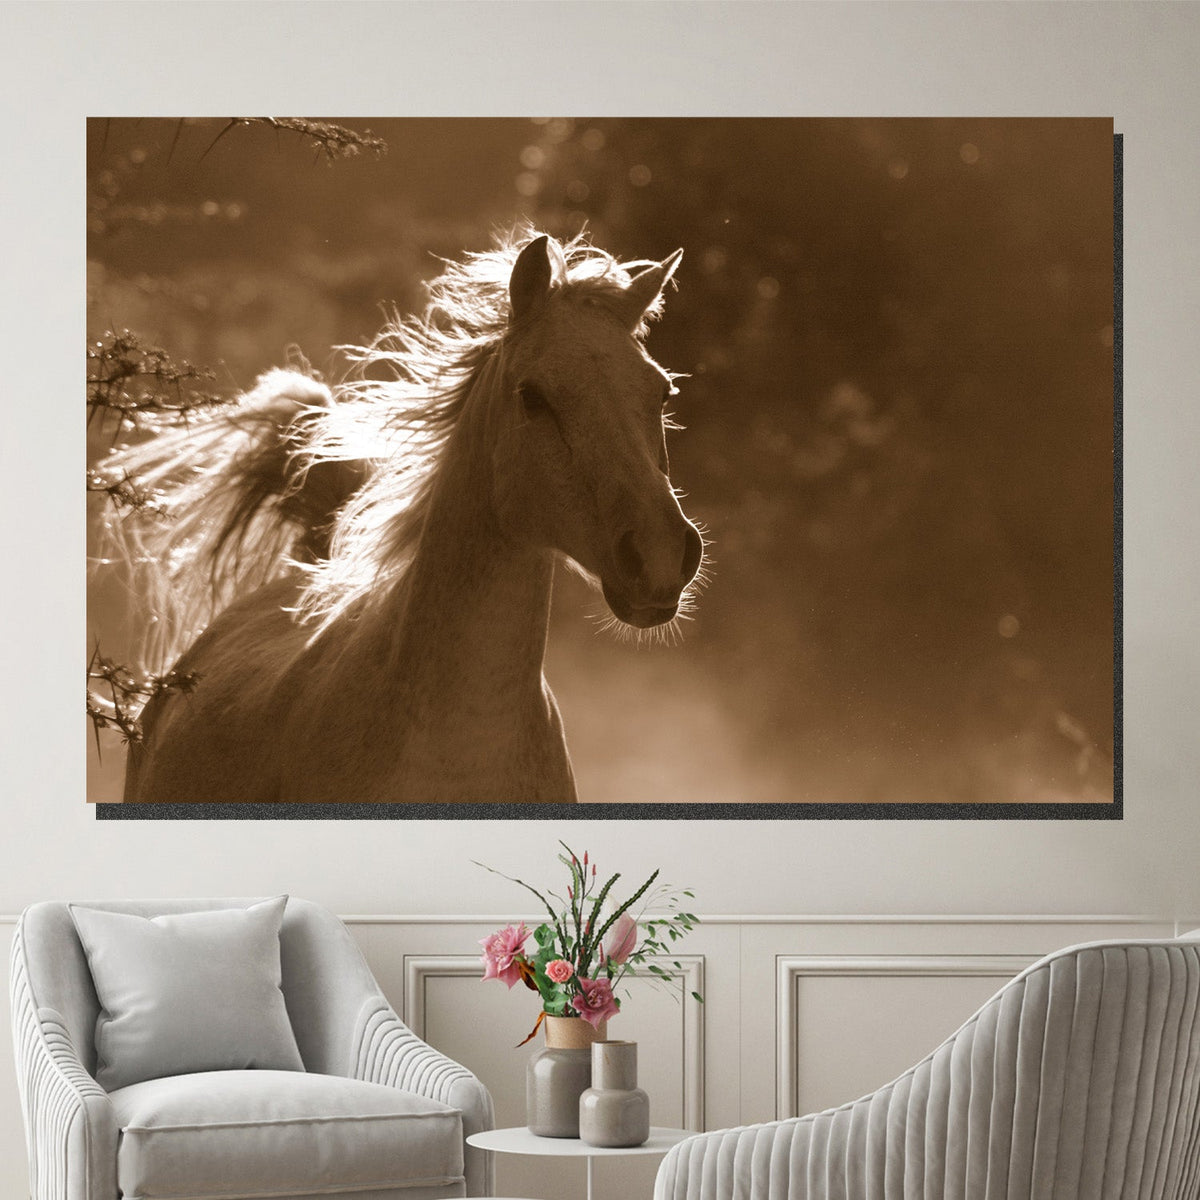 https://cdn.shopify.com/s/files/1/0387/9986/8044/products/WhiteWildHorseCanvasArtprintStretched-4.jpg